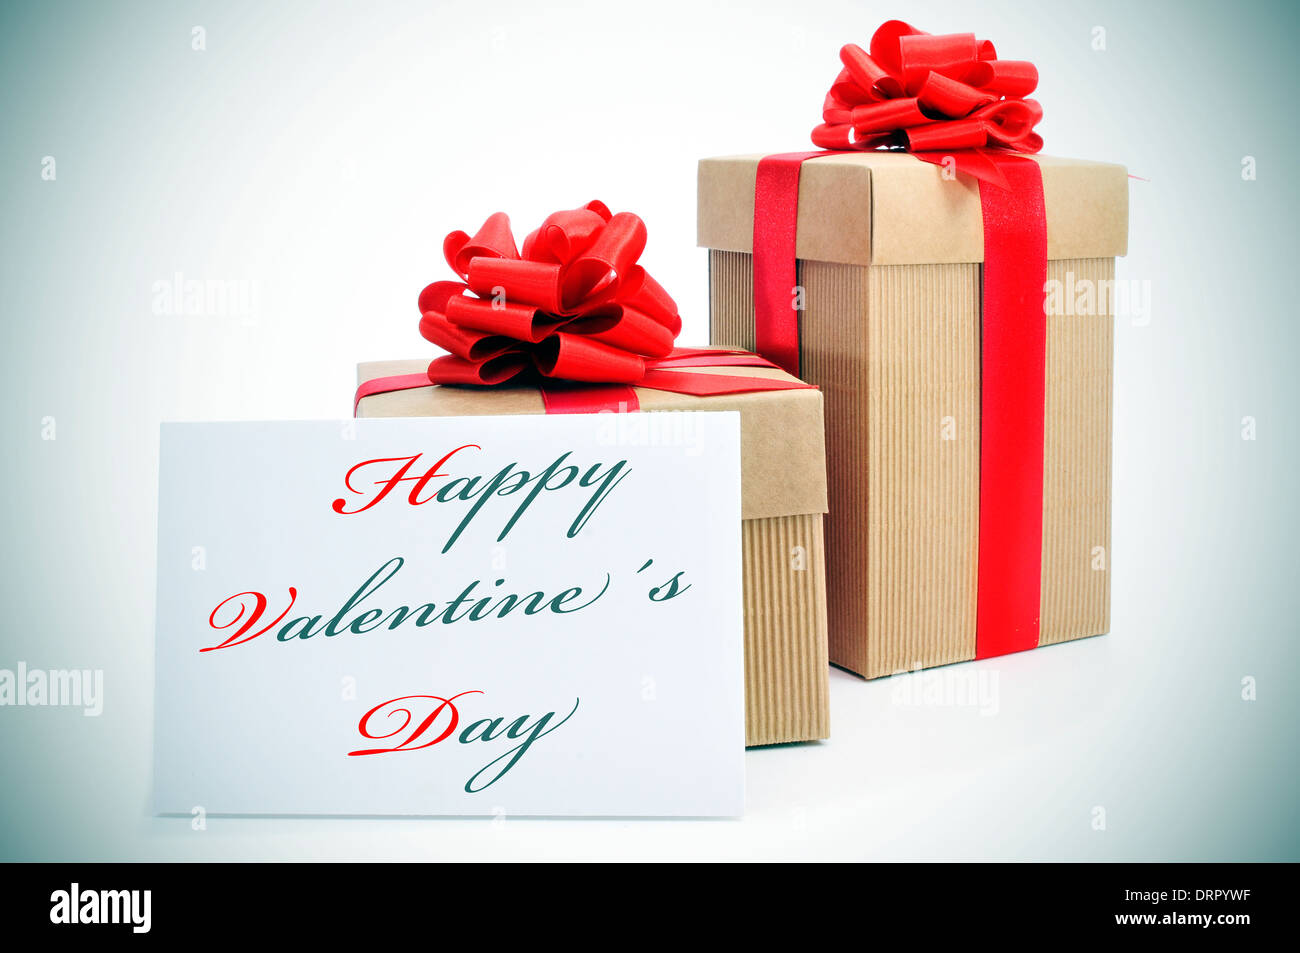 some gifts with red ribbon and a the sentence happy valentines day written in a signboard Stock Photo